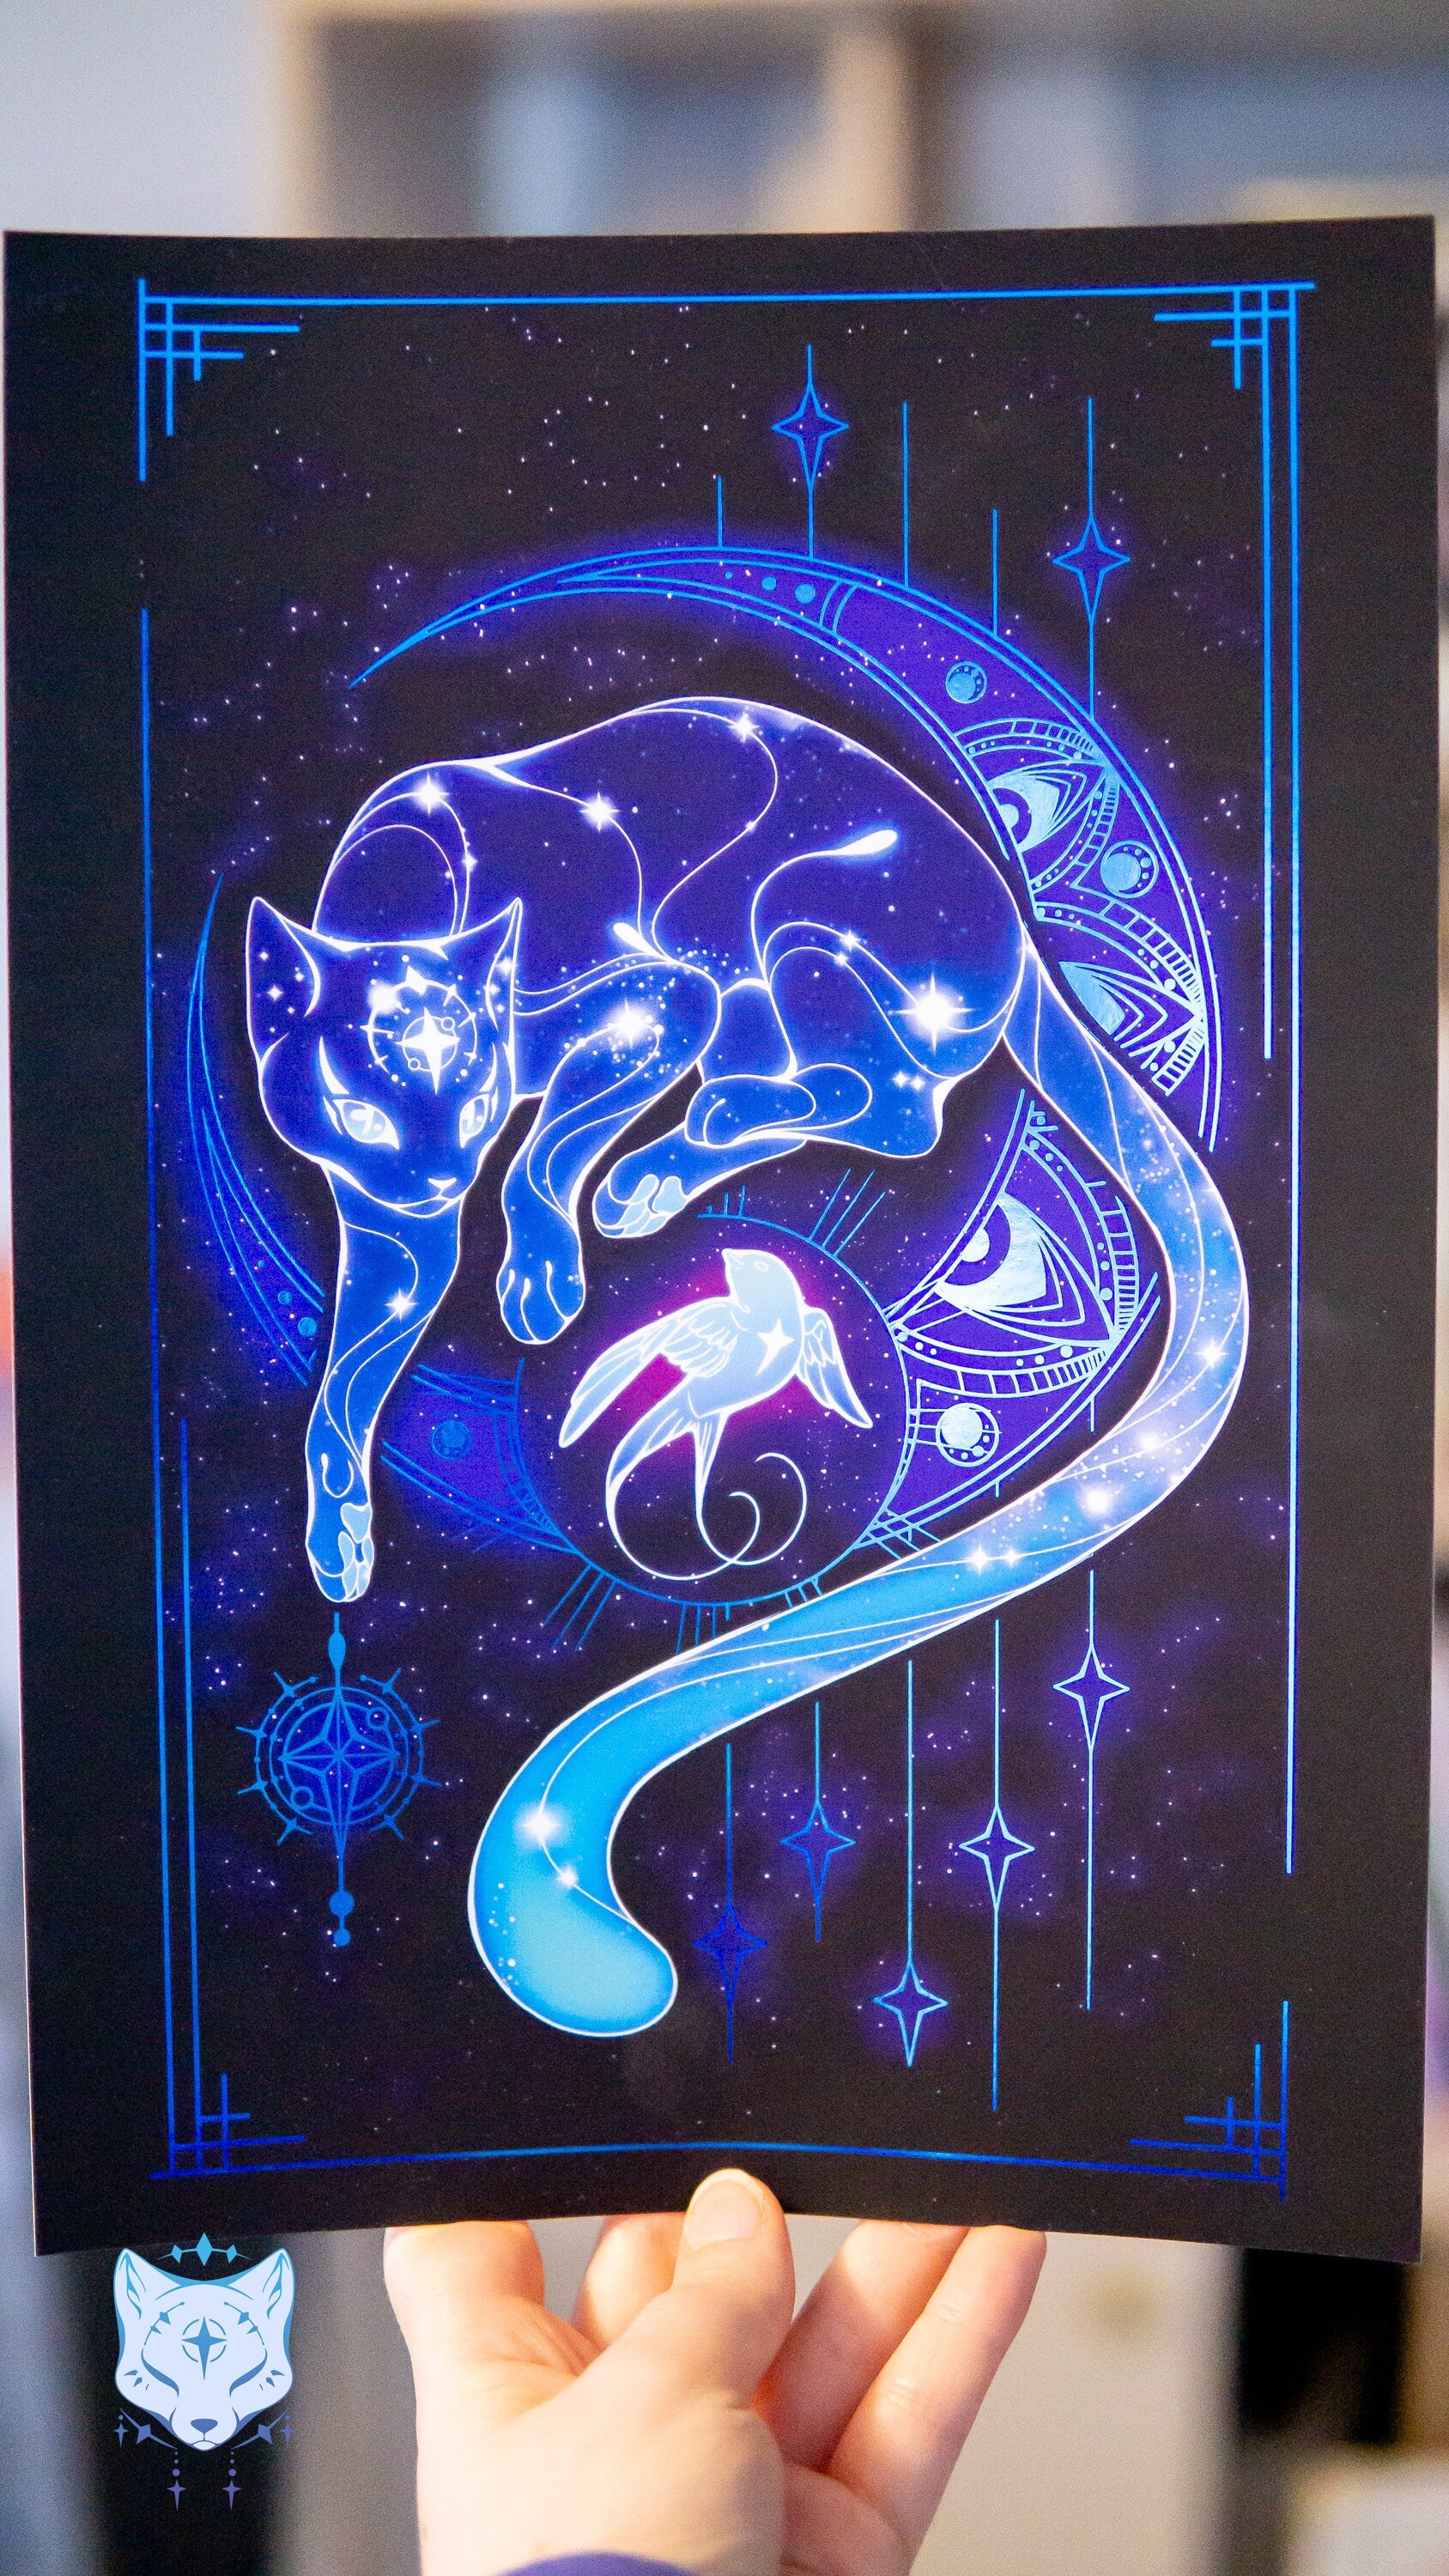 North Star Cat and the Stowaway Star - A4 Blue Foil Print (BLUE. Purple version also available)